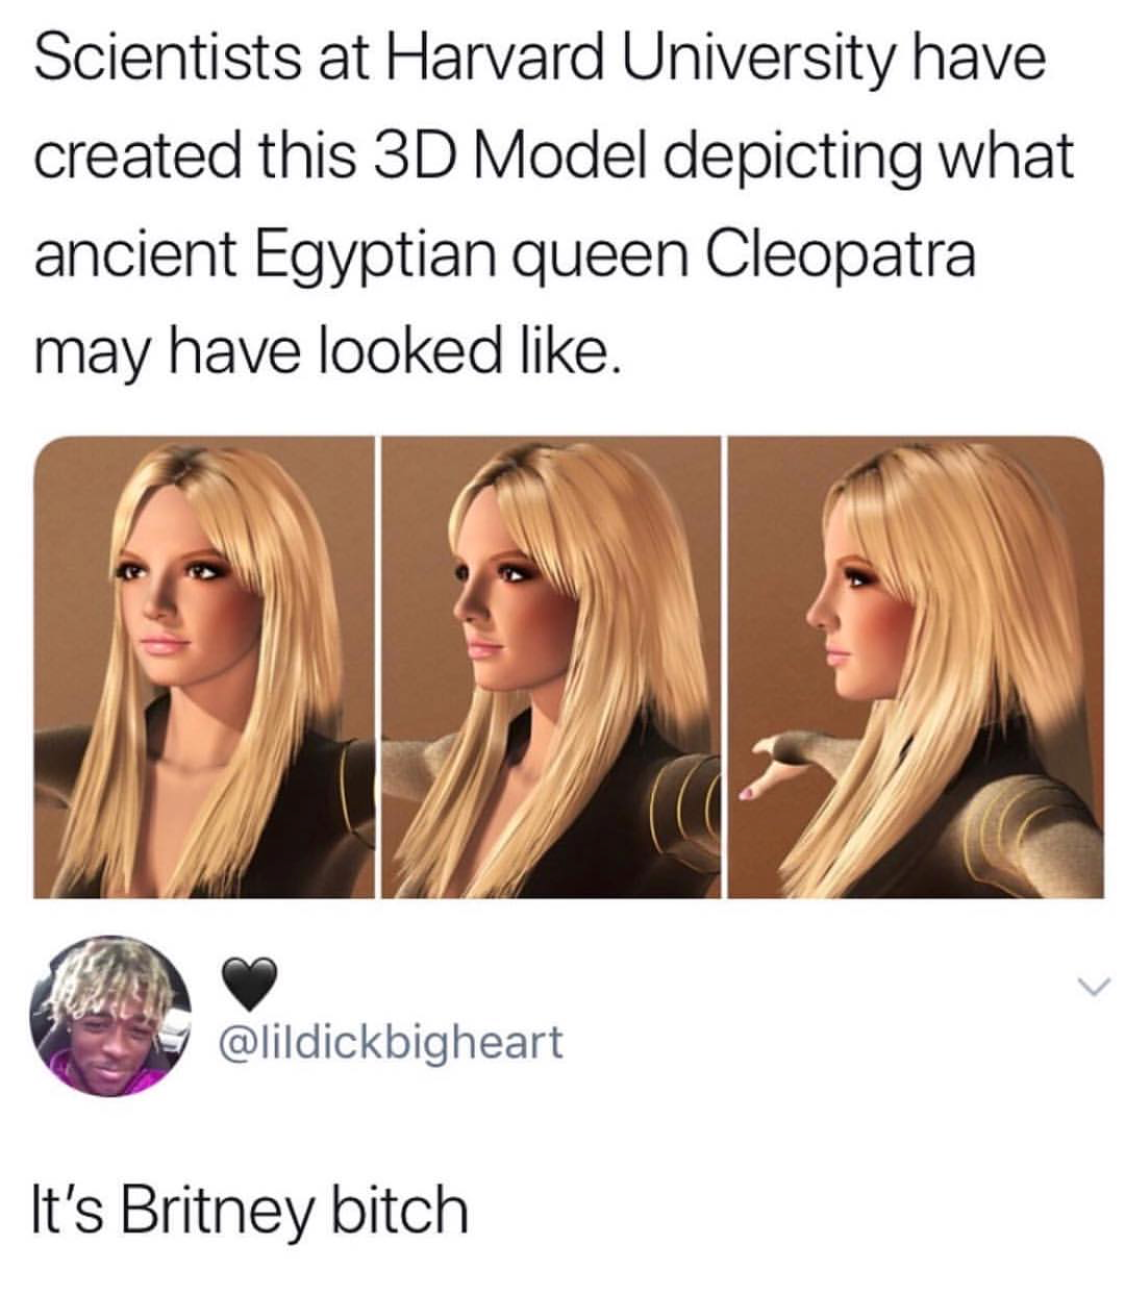 it's britney bitch cleopatra - Scientists at Harvard University have created this 3D Model depicting what ancient Egyptian queen Cleopatra may have looked . It's Britney bitch